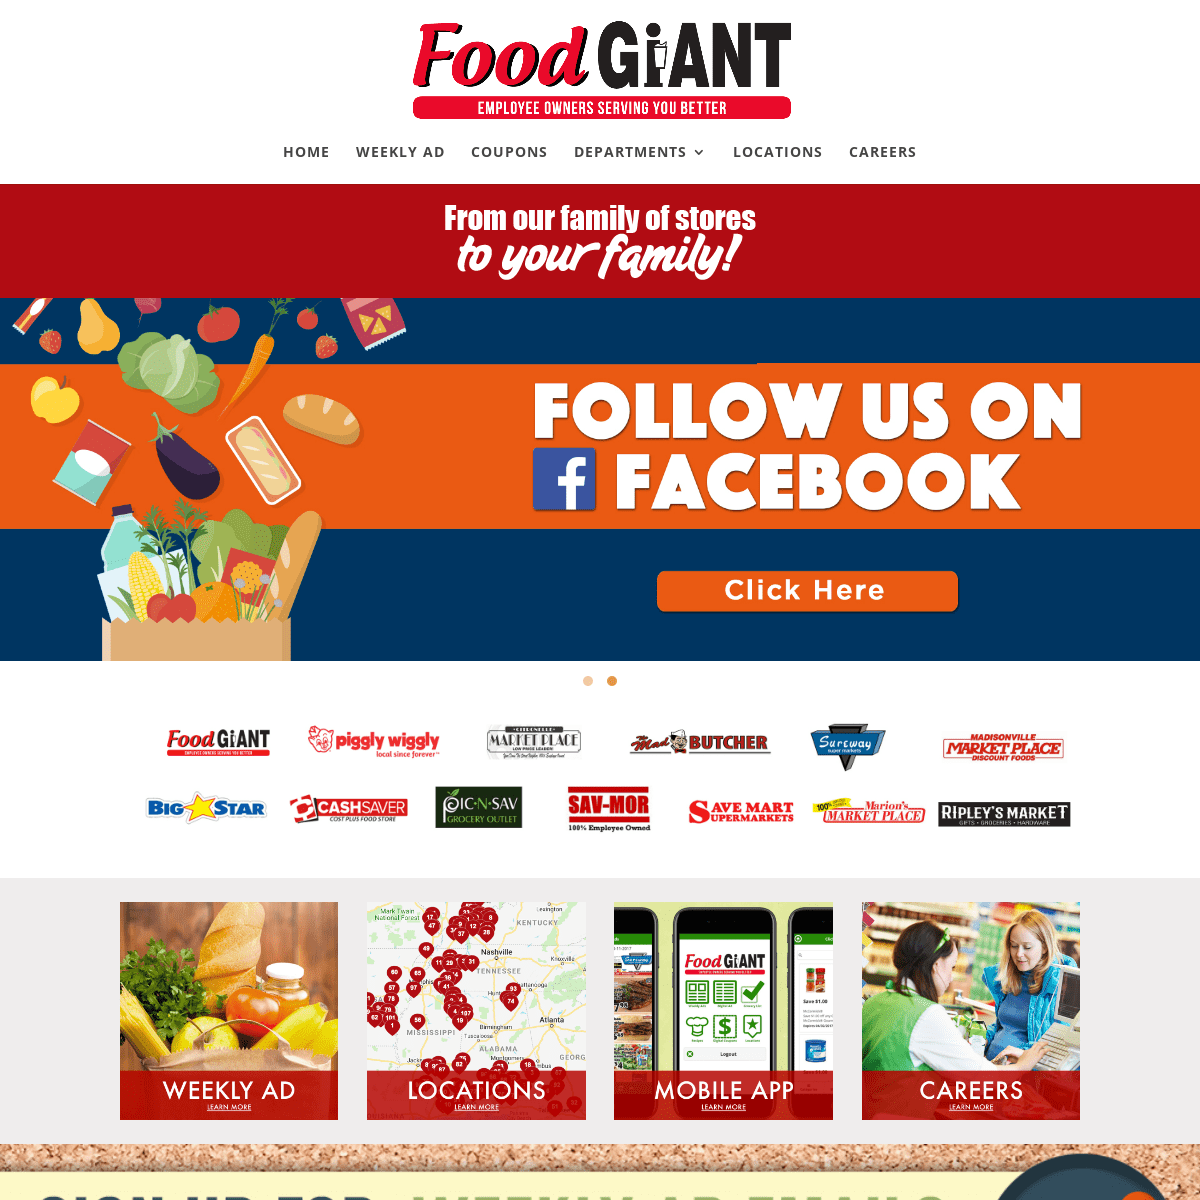 A complete backup of foodgiant.com